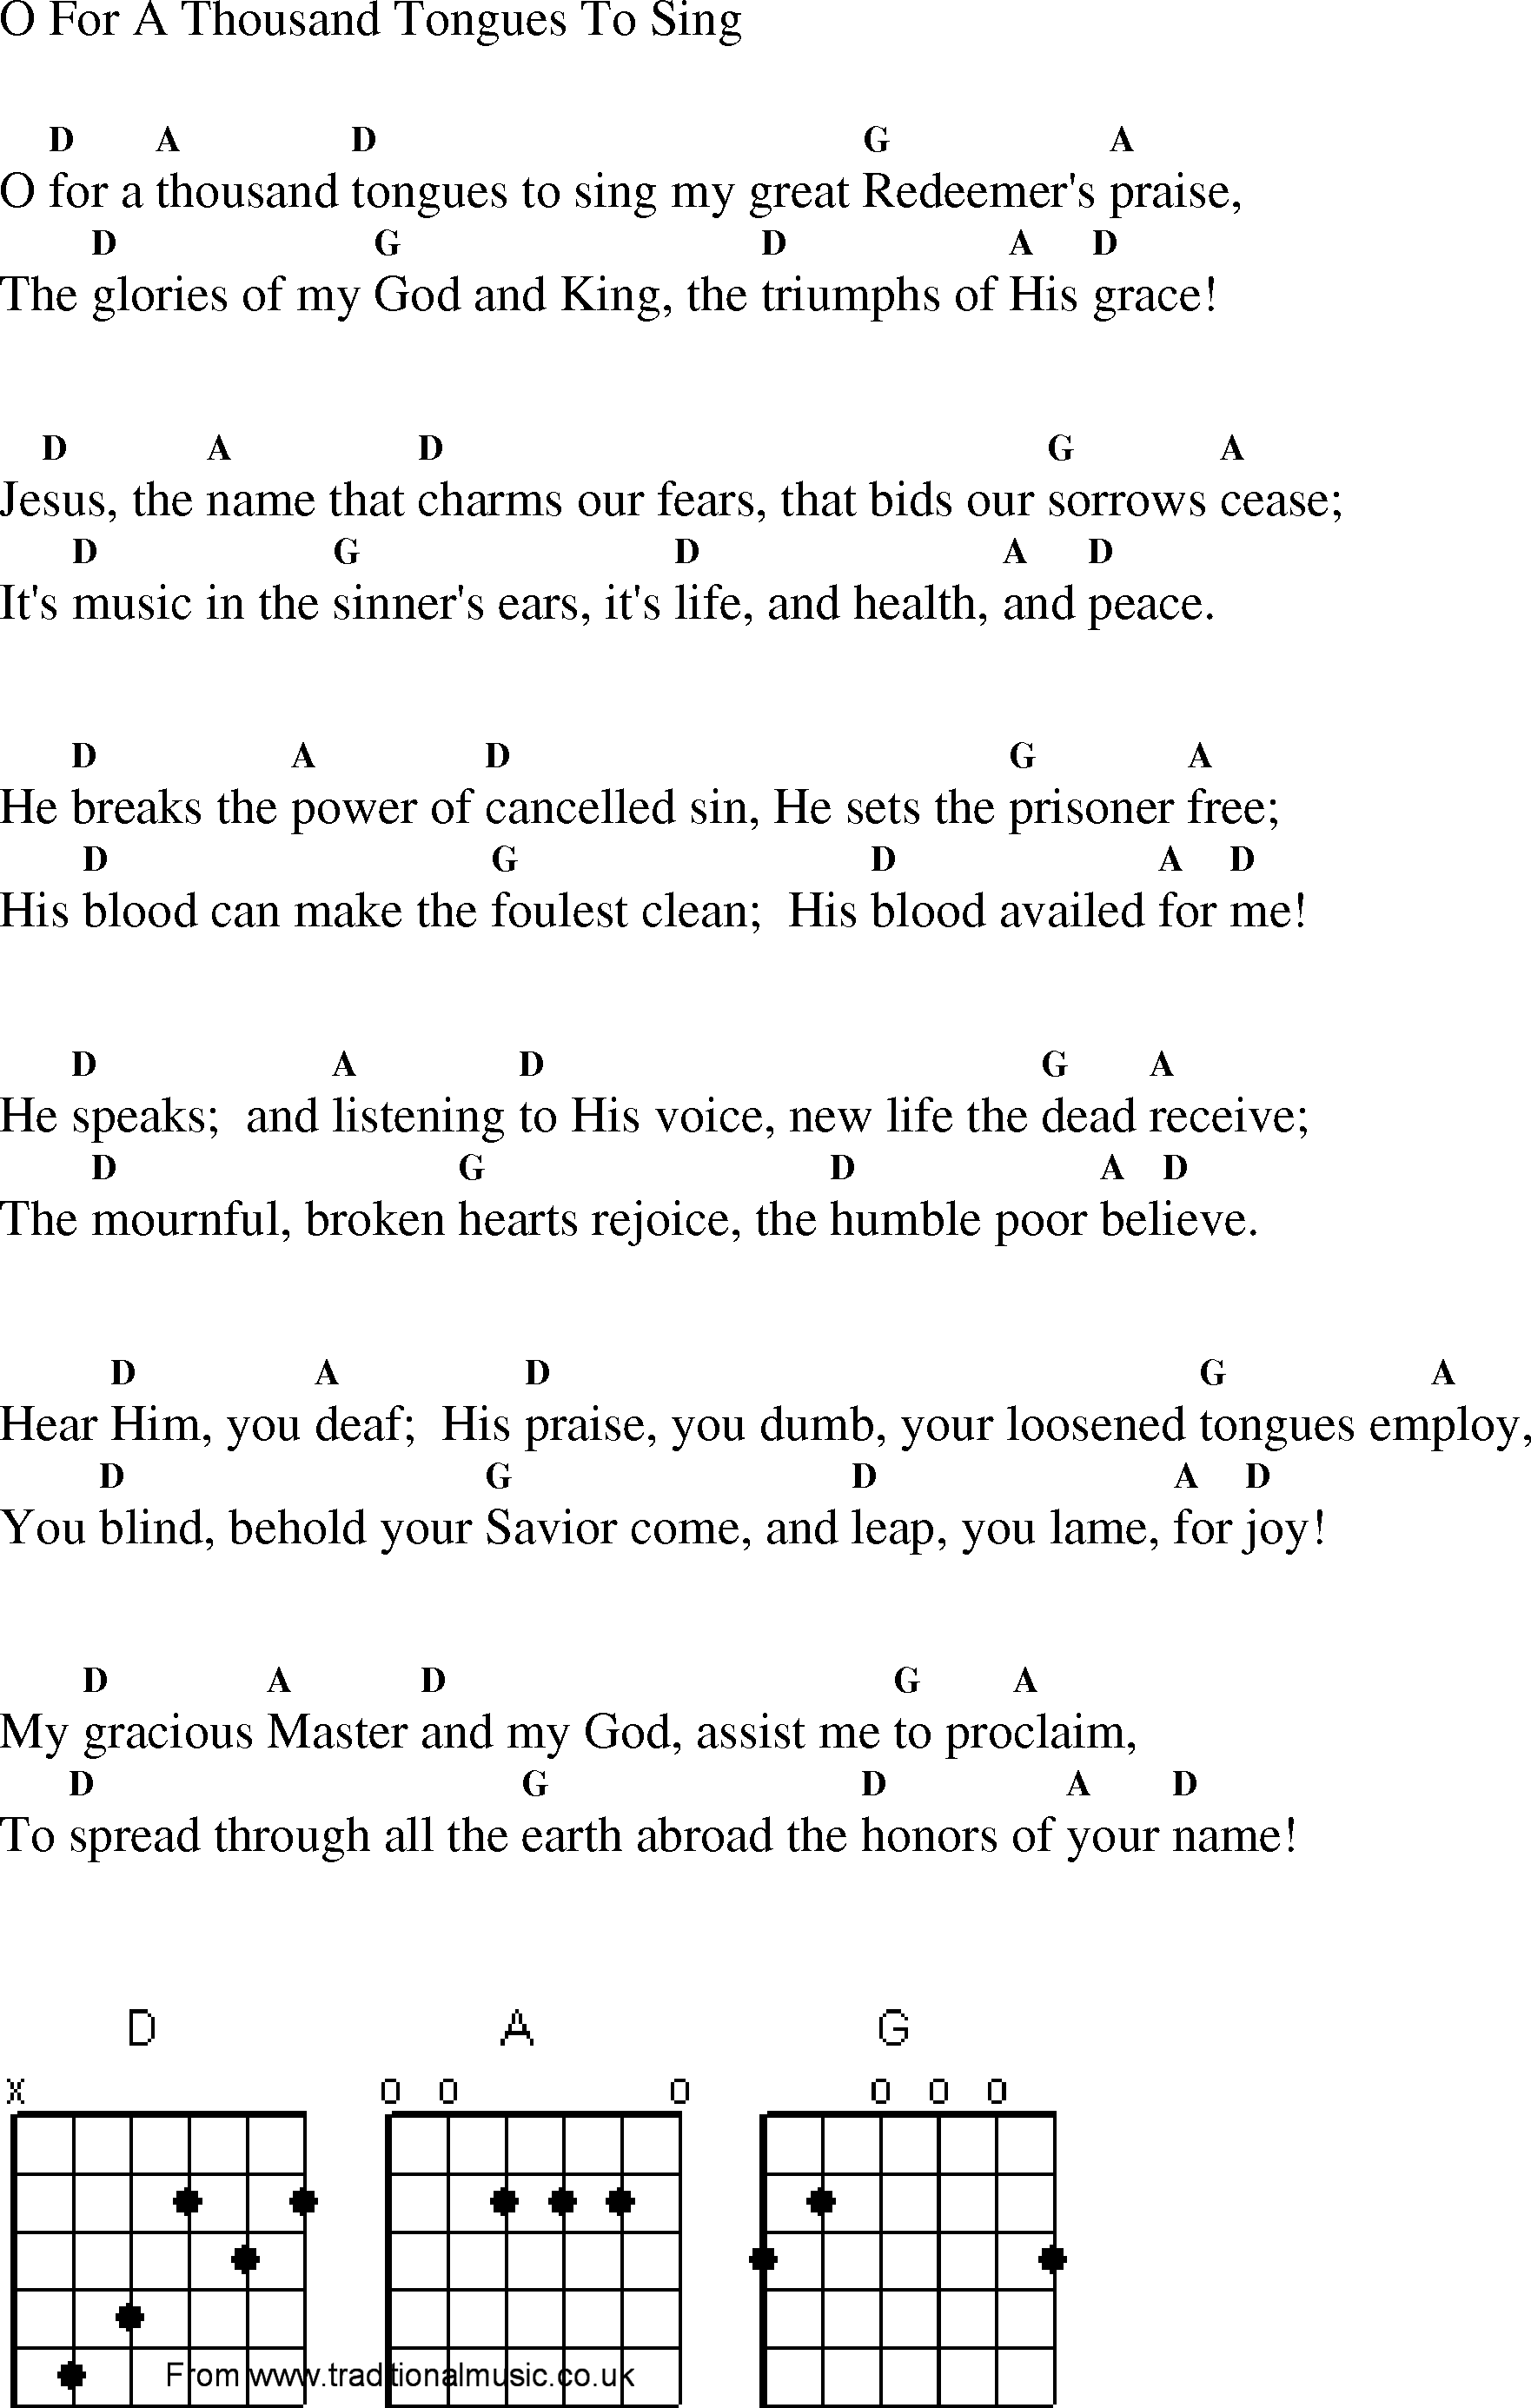 Gospel Song: o_for_a_thousand_tongues_to_sing, lyrics and chords.